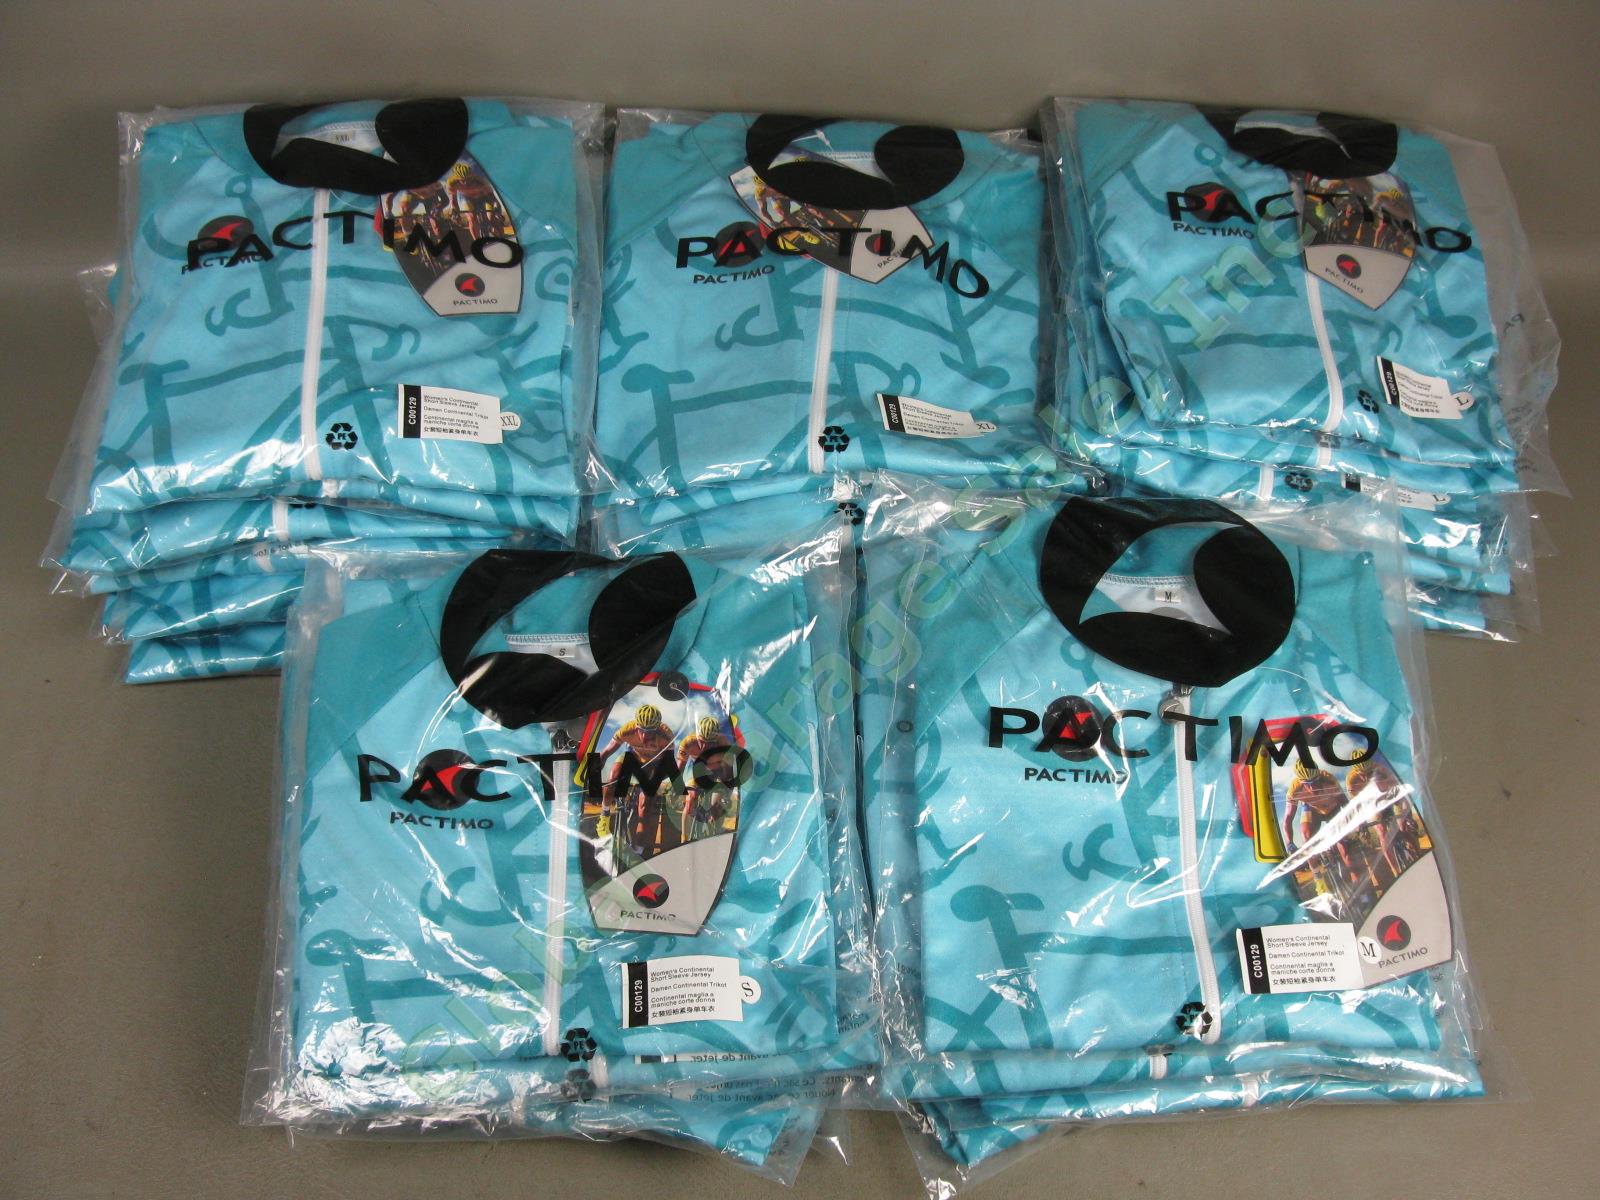 44 NEW Womens Pactimo Continental Short Sleeve Cycling Jersey Lot S M L XL XXL